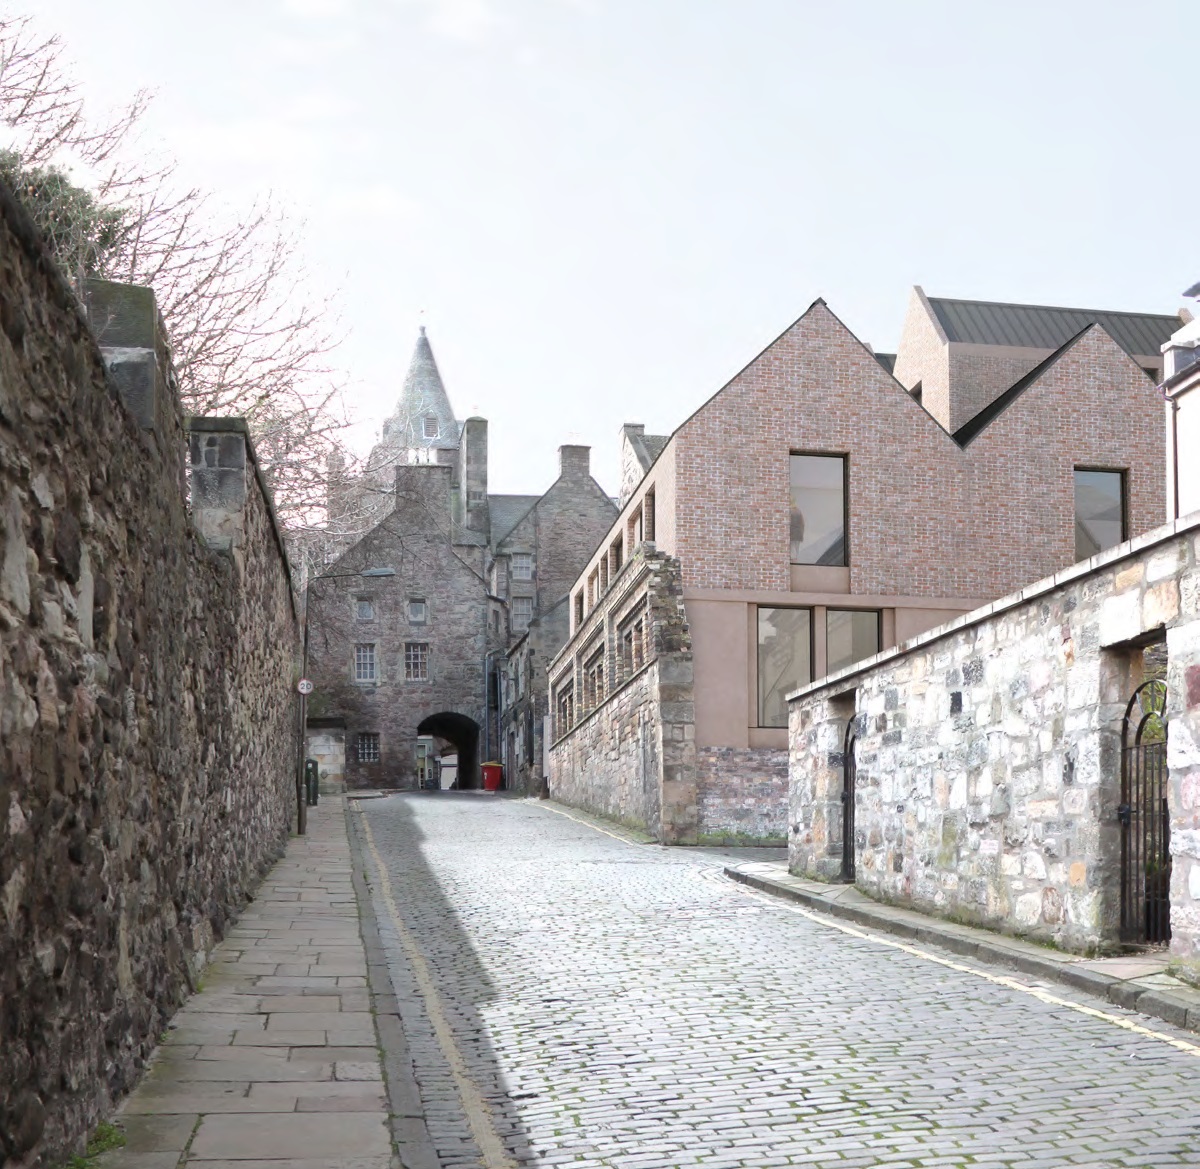 Canongate site goes full circle with return of student accommodation plans